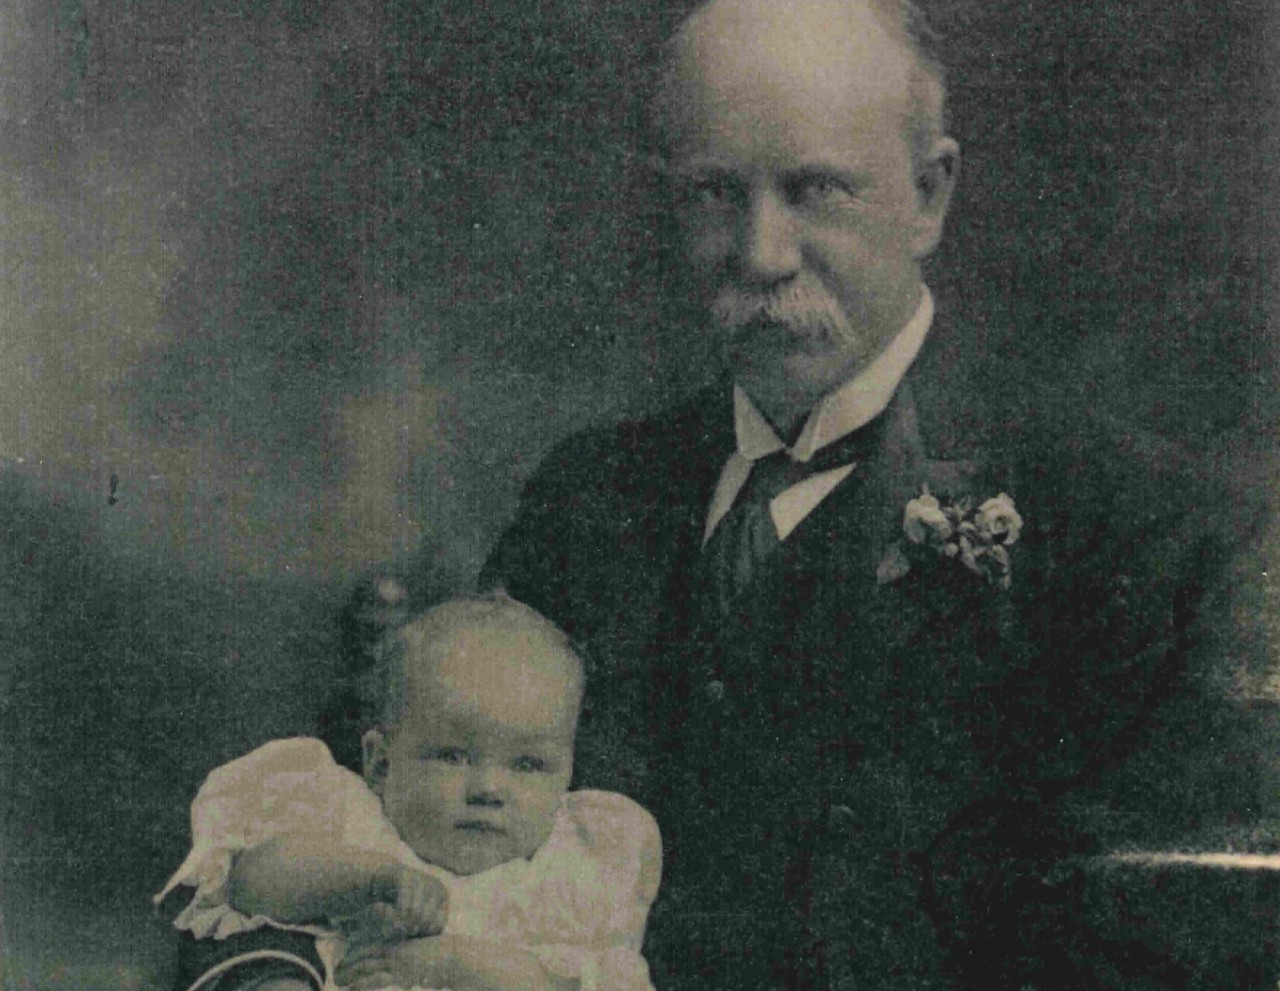 A photograph from the early 1900s of the Honourable George Swinburne and his baby daughter, Margaret who appears around six months old. She sits on his lap in a white frilly dress, he has an arm around her. 